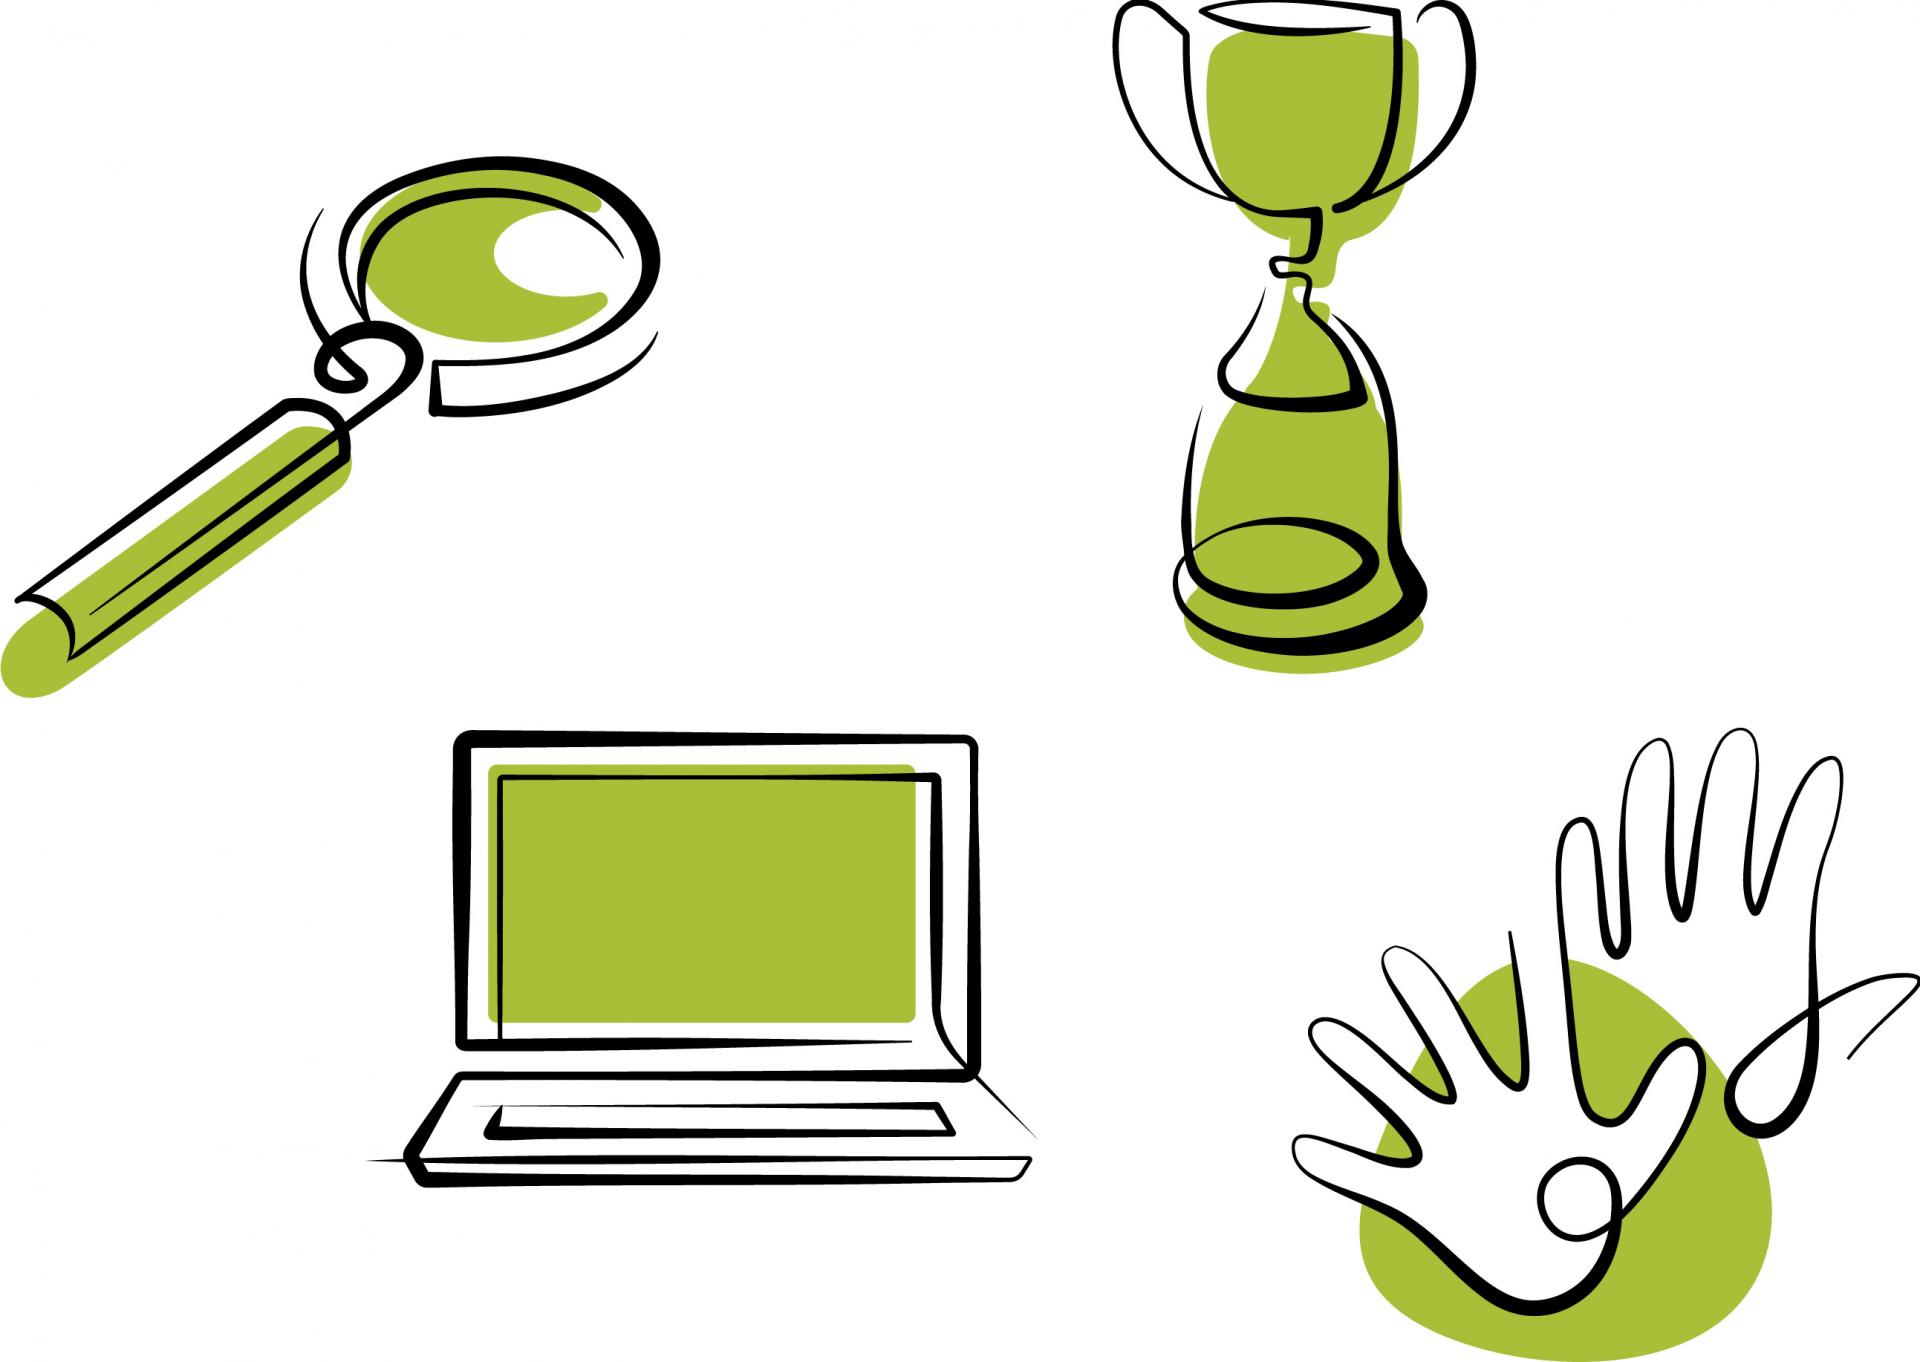 Graphic of magnifying glass, computer, trophy, and hands 